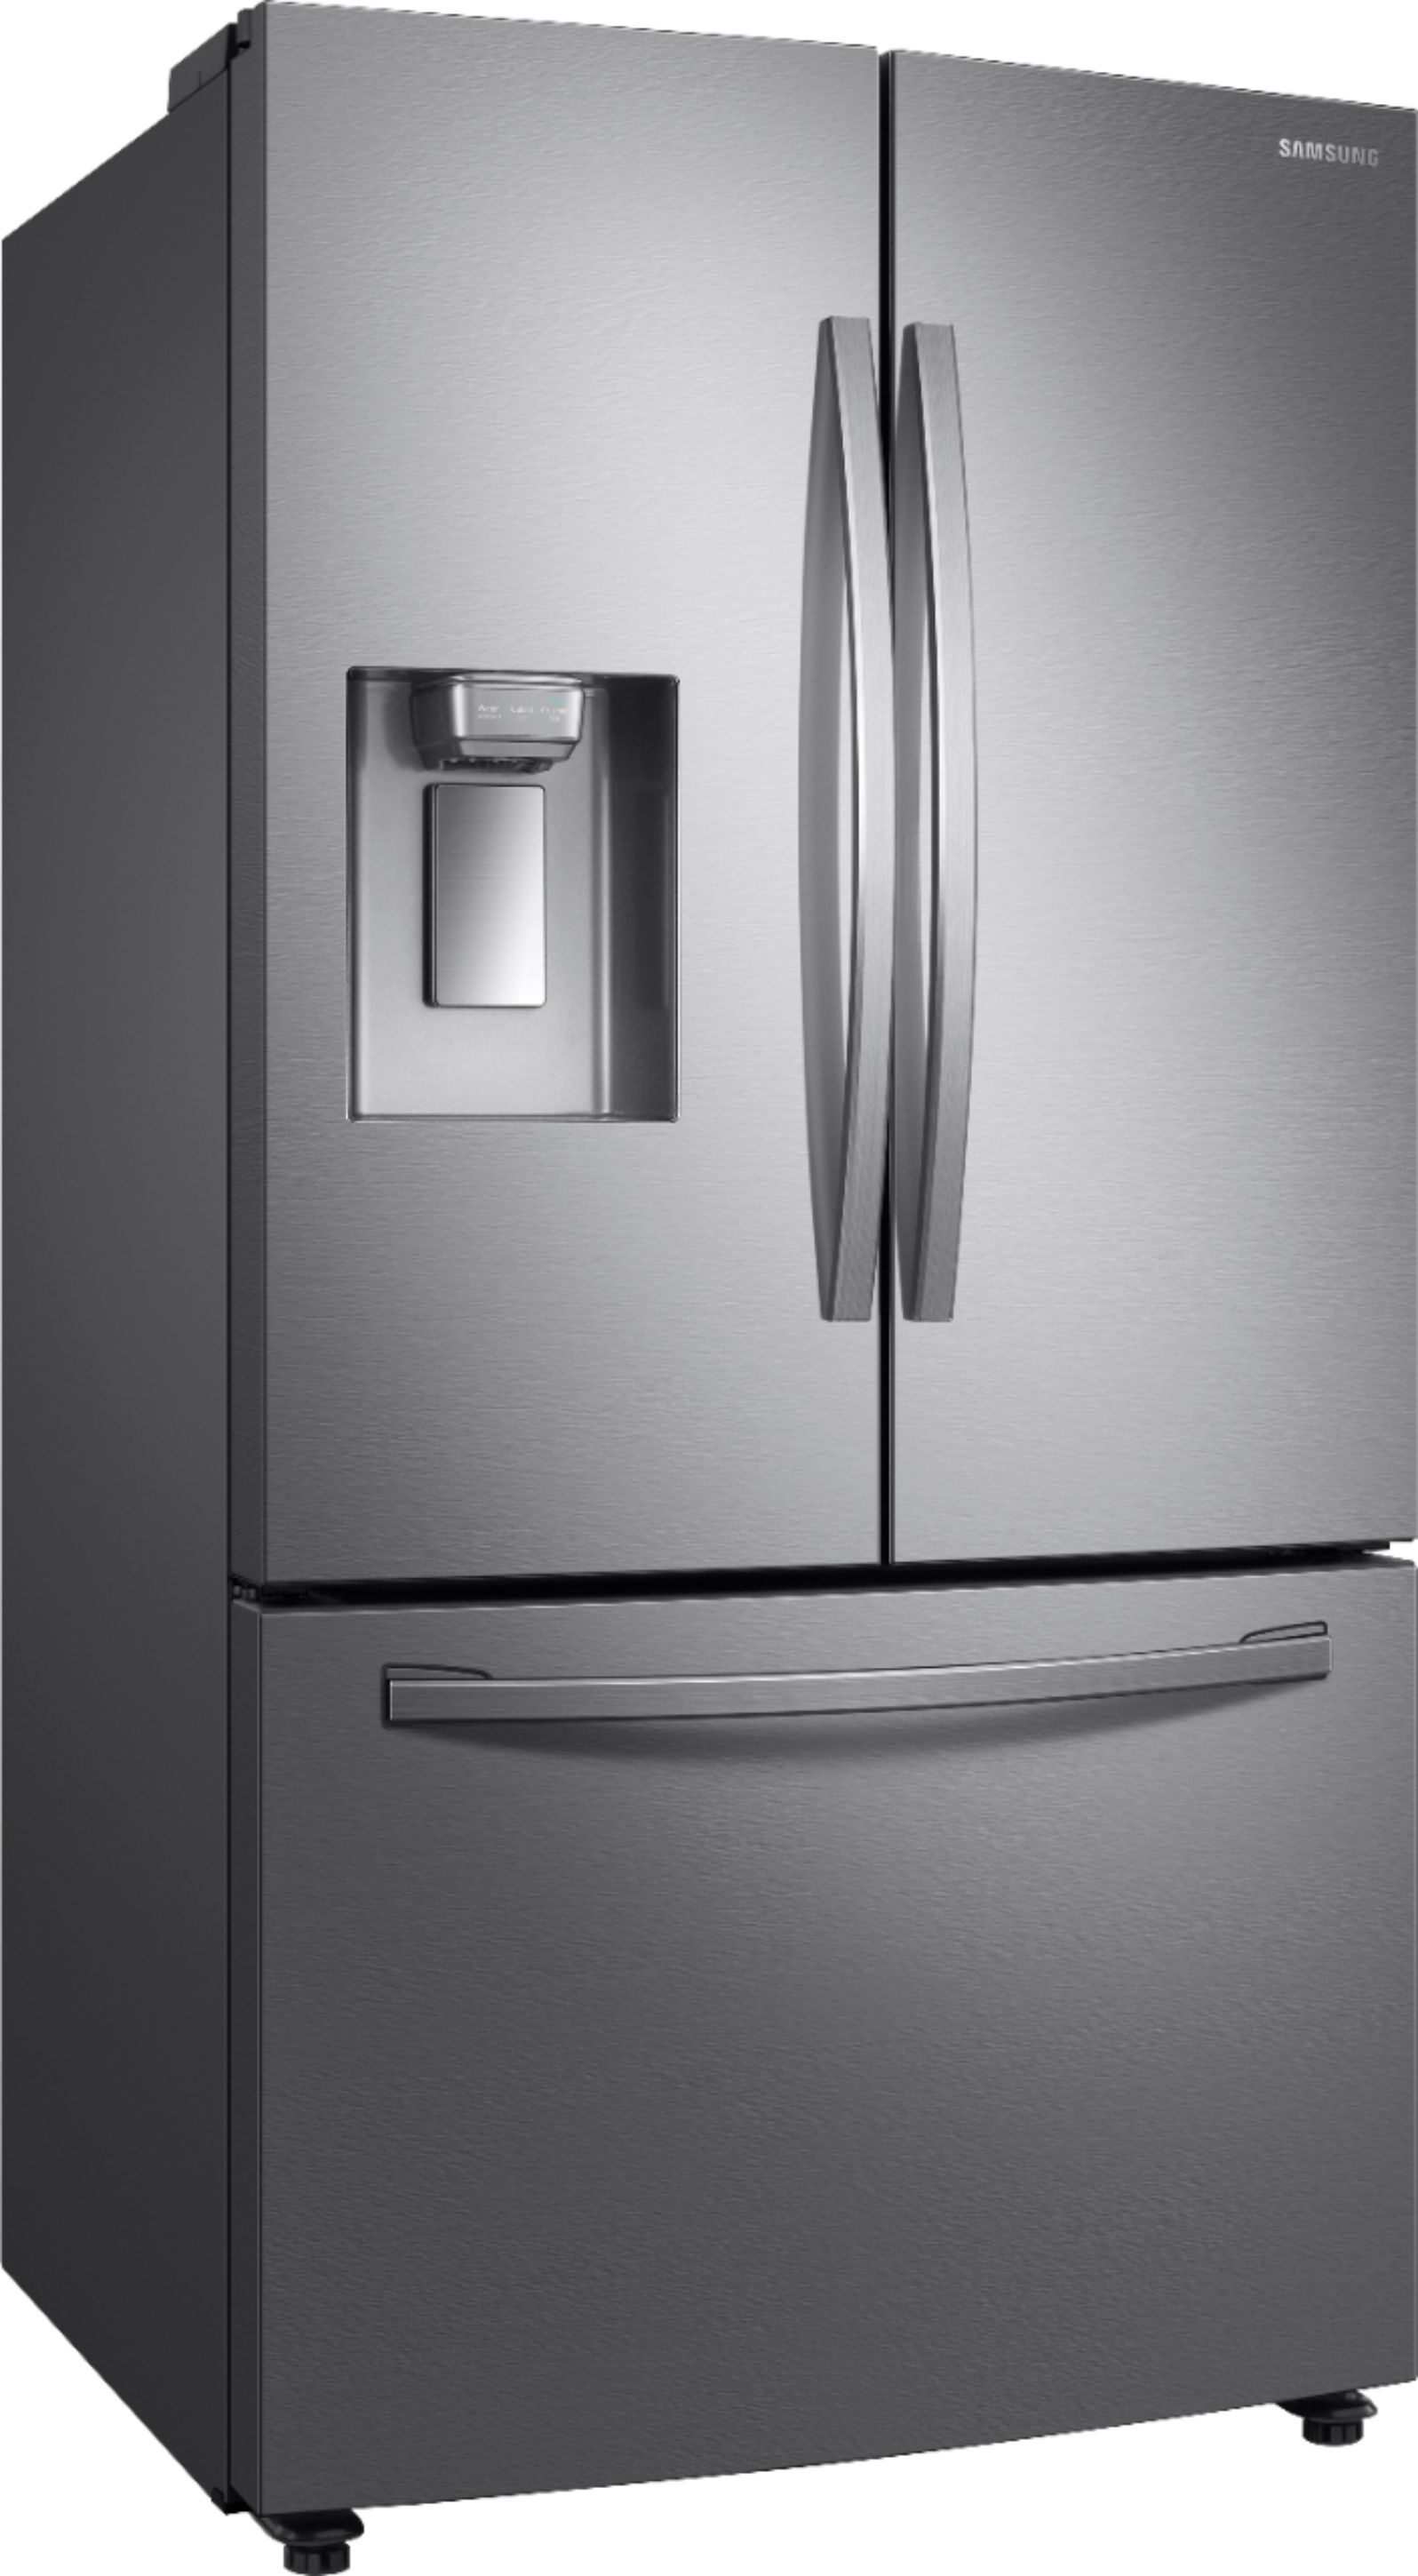 Angle View: Samsung - 28 Cu. Ft. French Door Refrigerator with CoolSelect Pantry - Stainless steel